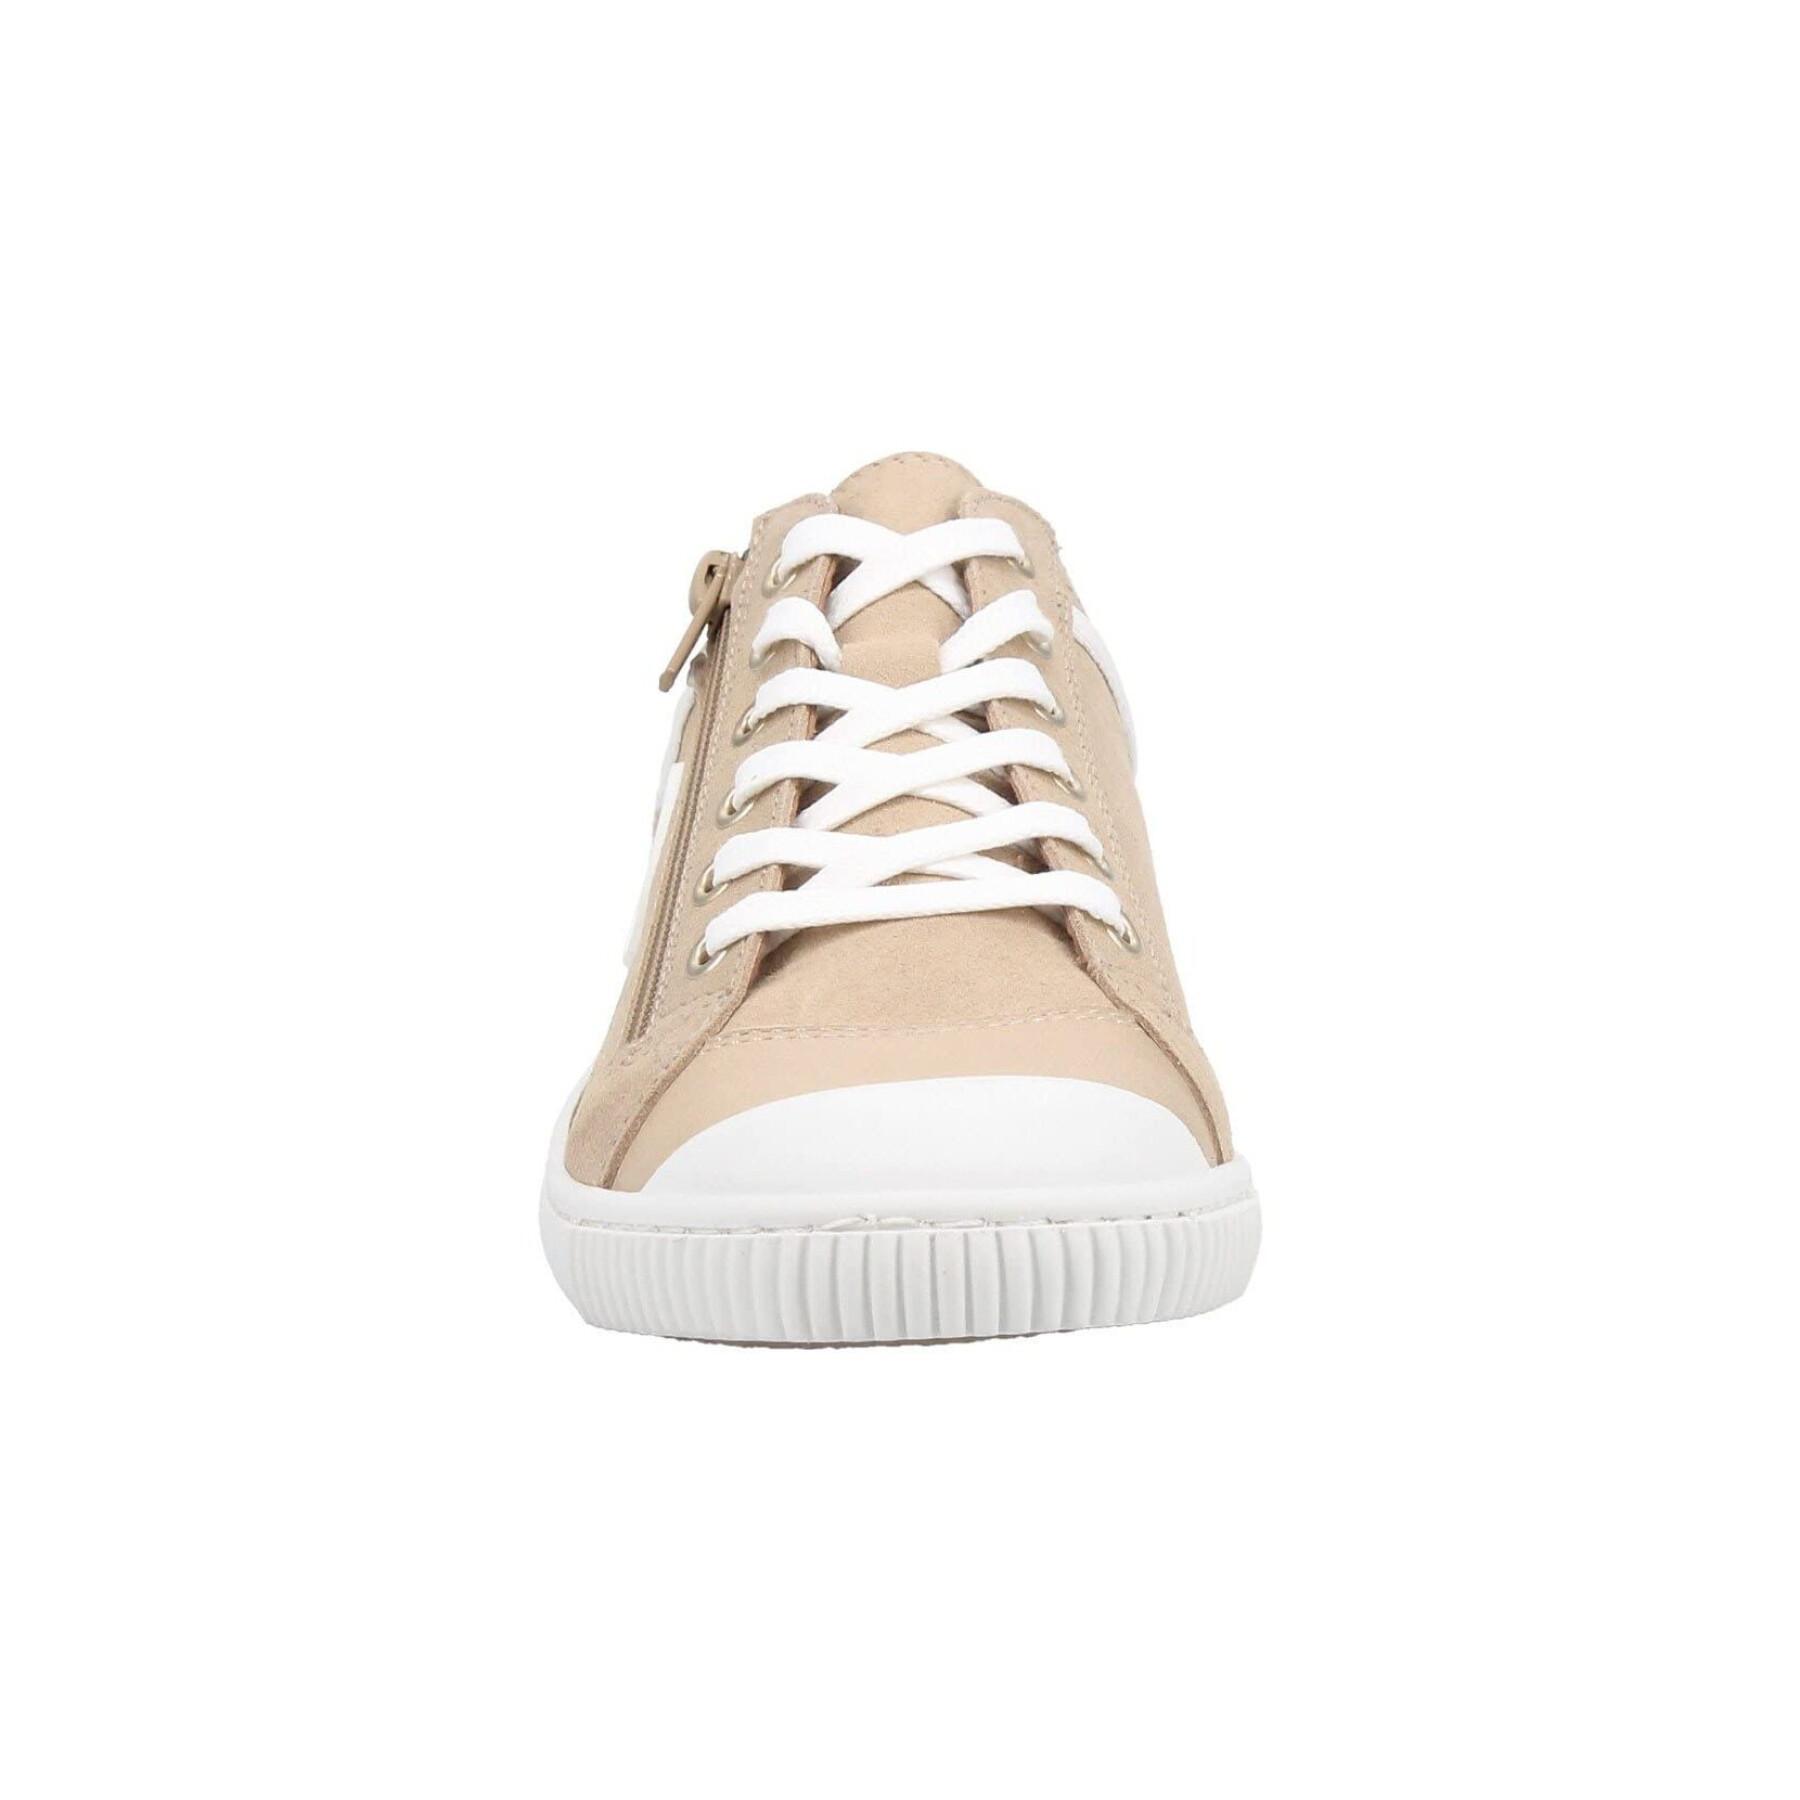 Women's sneakers Pataugas Bisk/Mix F2I